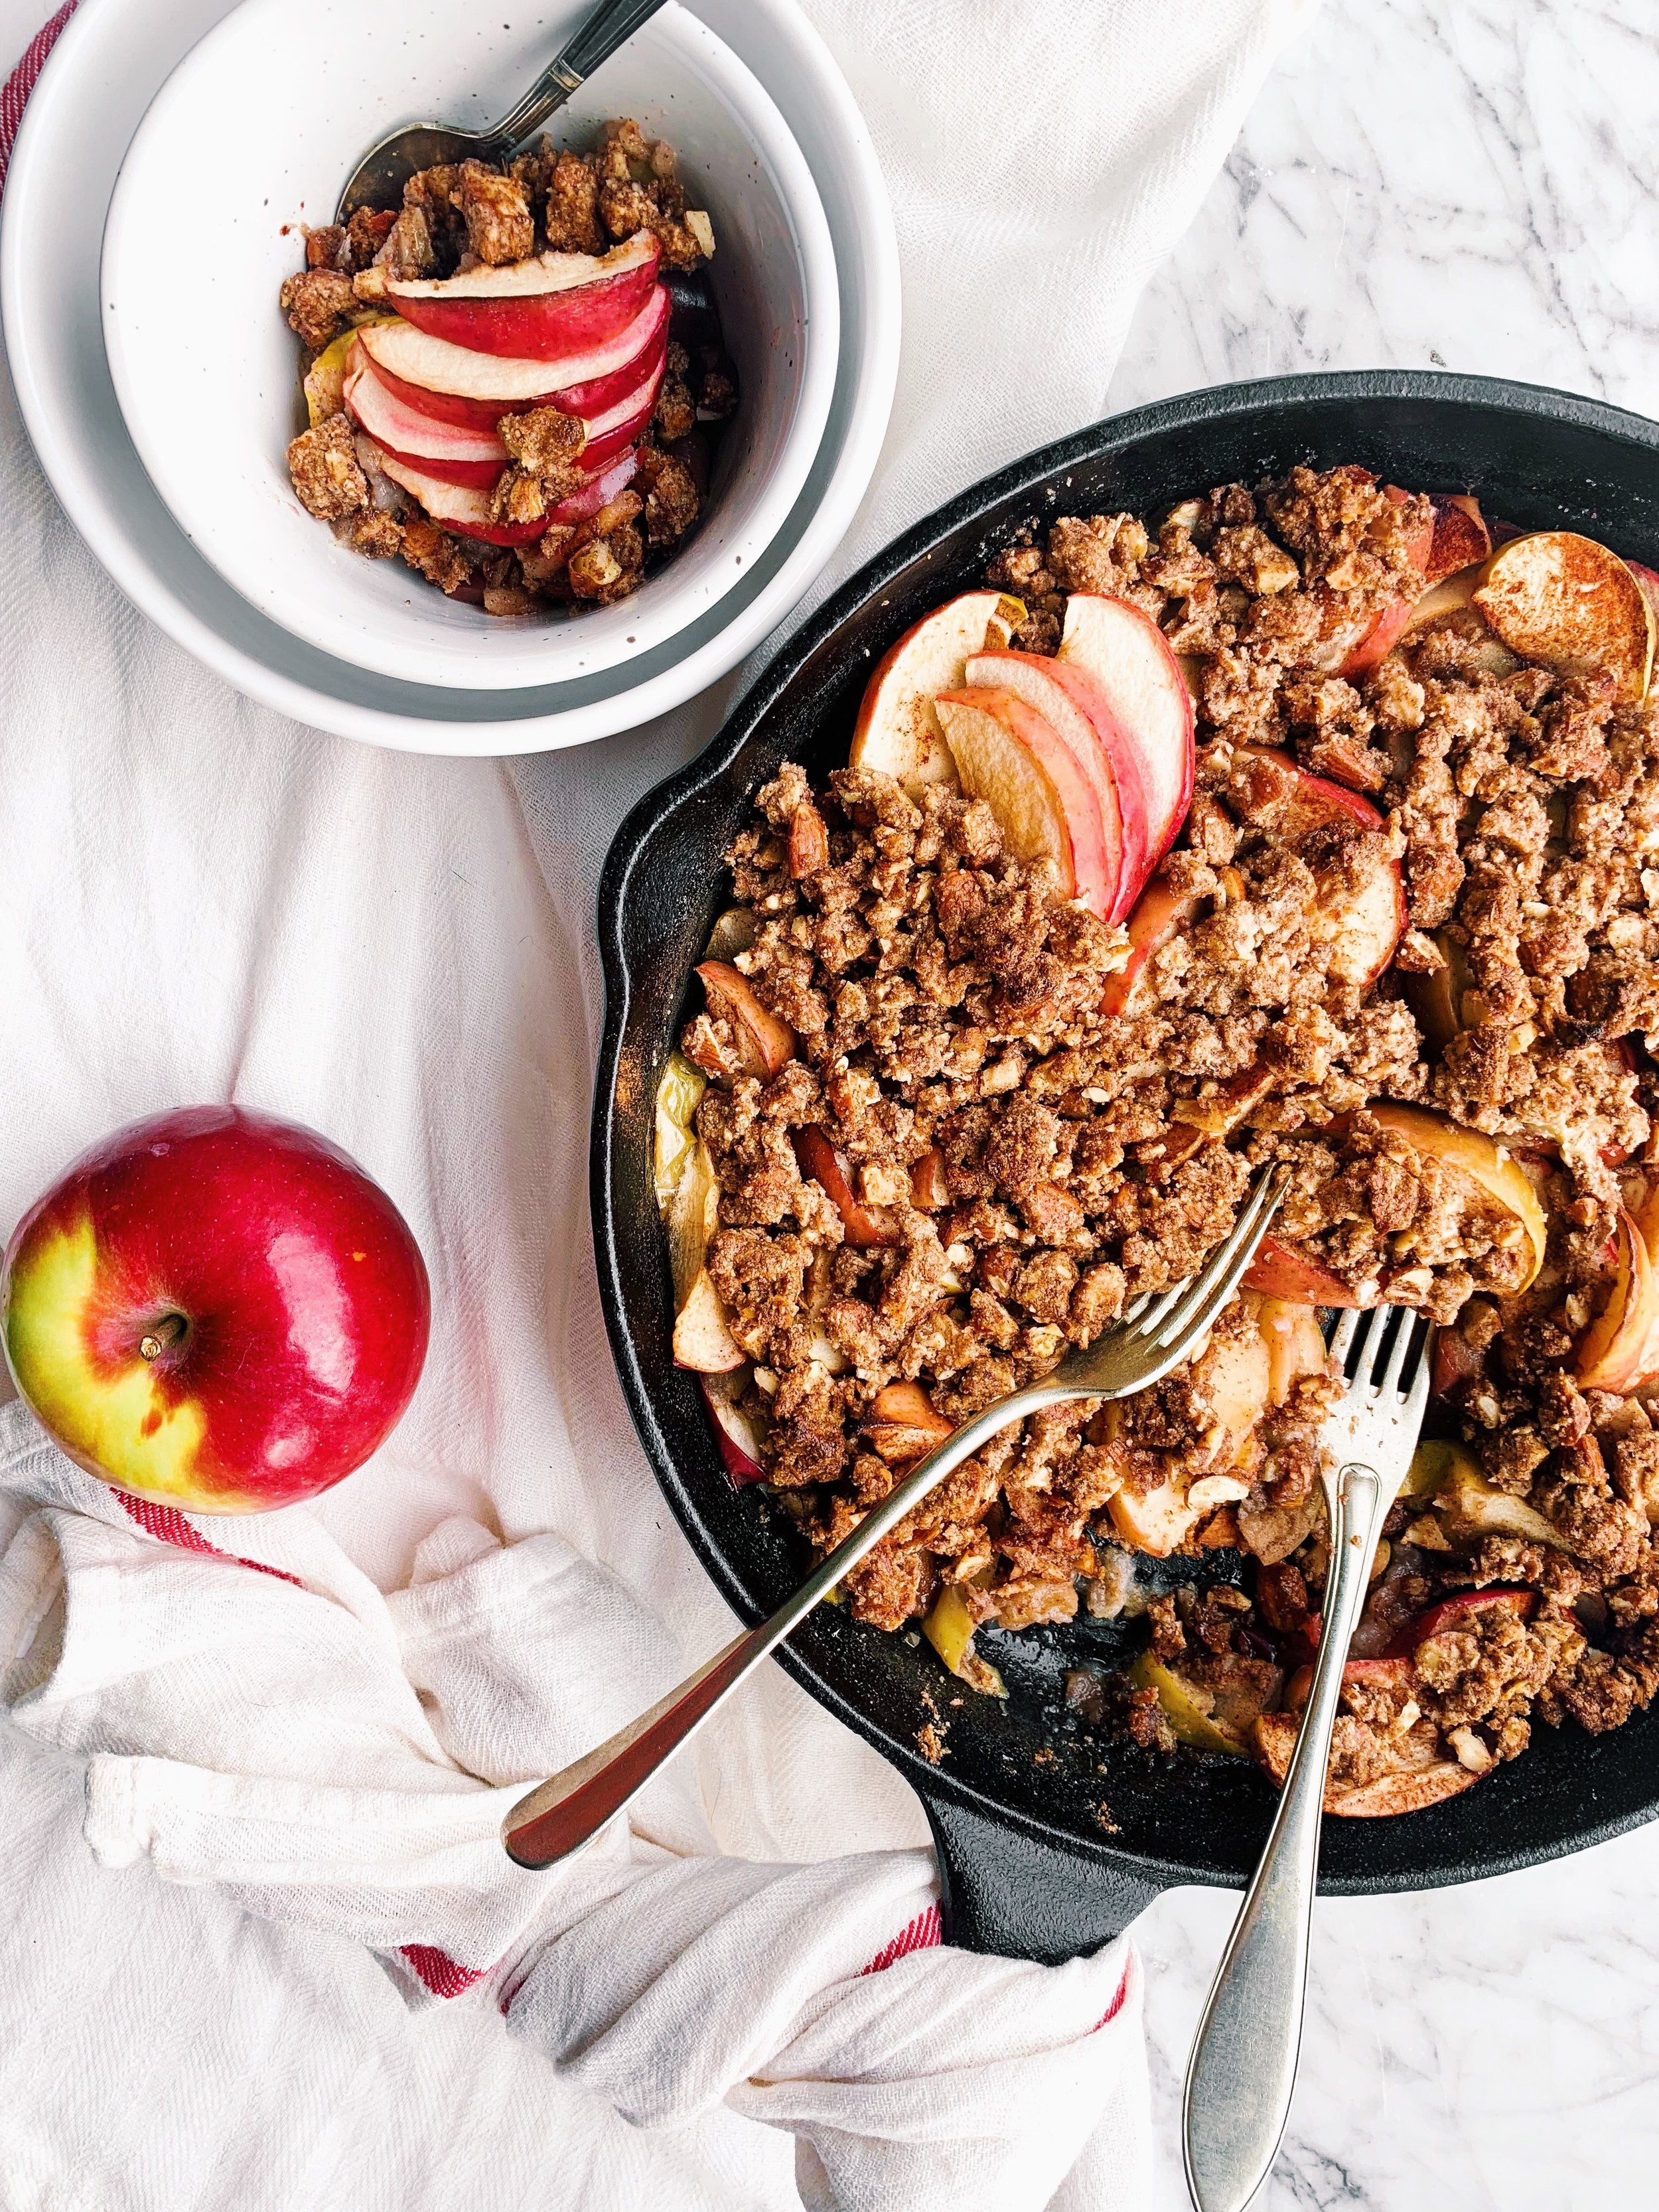 Easy Apple Crumble by bethbierema | Quick & Easy Recipe | The Feedfeed